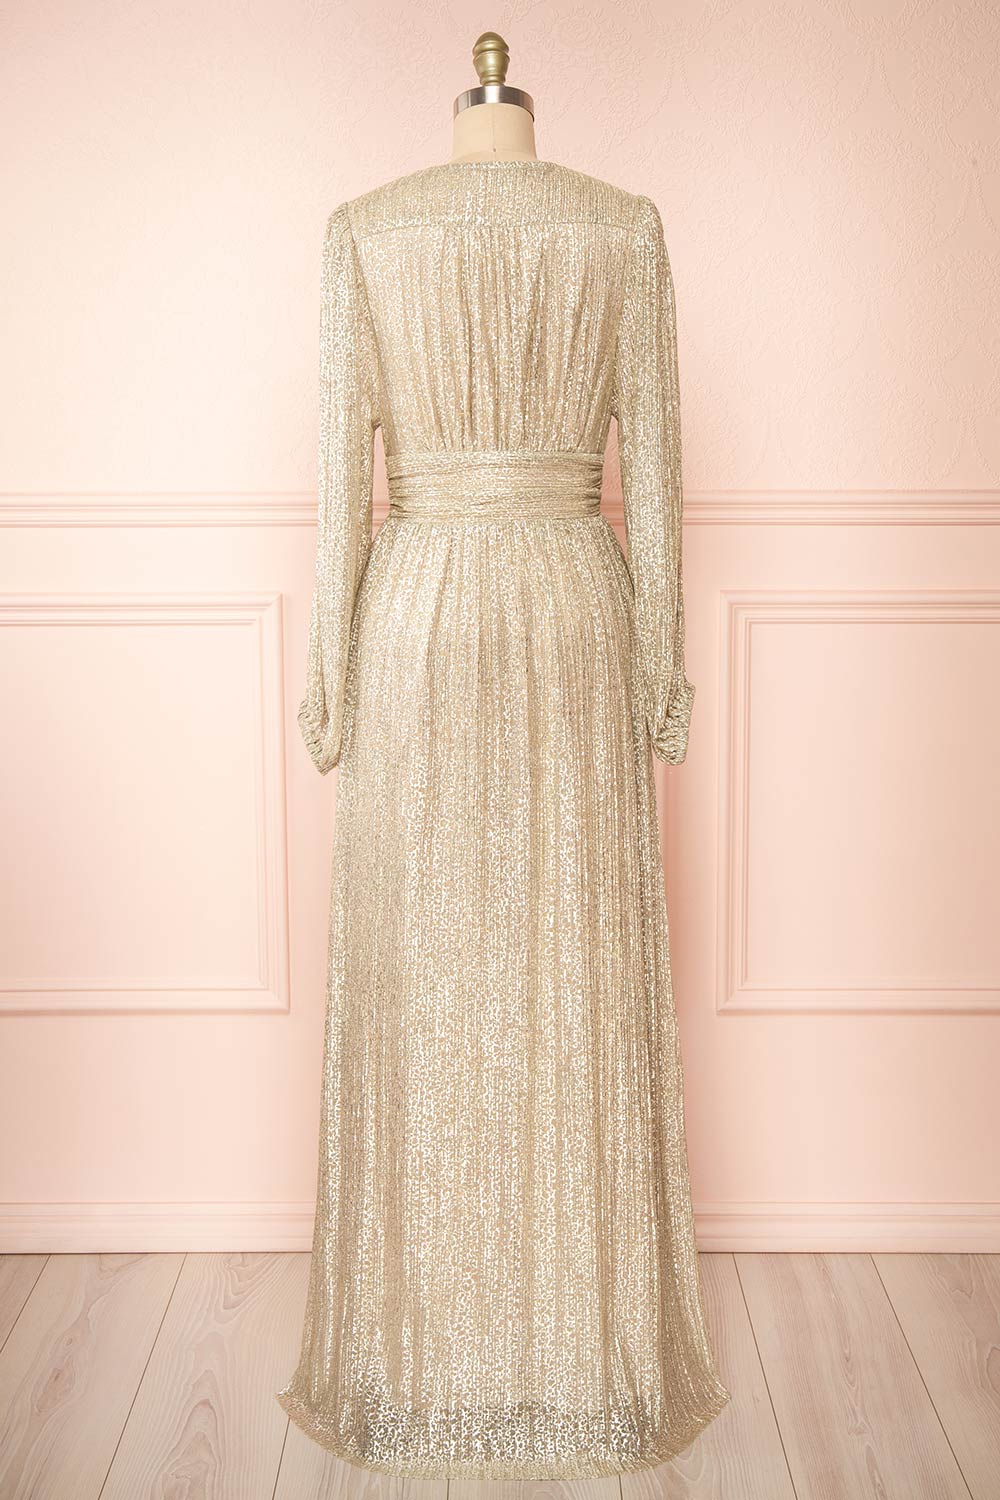 Kennedy Shimmery Patterned Maxi Dress | Boutique 1861 back view 